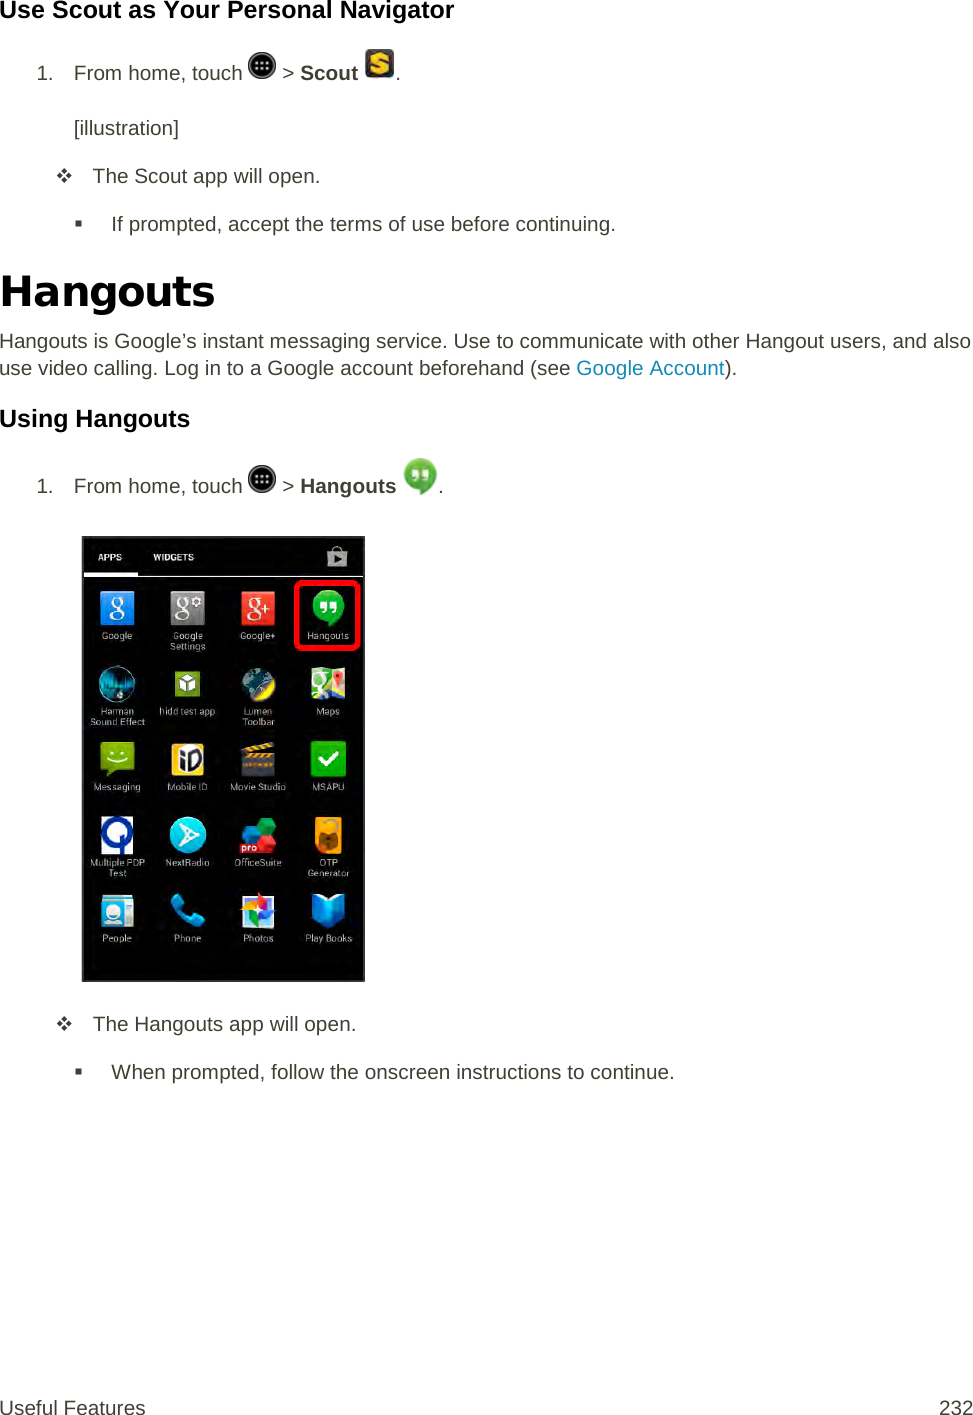 Use Scout as Your Personal Navigator 1.  From home, touch   &gt; Scout  .  [illustration]  The Scout app will open.  If prompted, accept the terms of use before continuing. Hangouts Hangouts is Google’s instant messaging service. Use to communicate with other Hangout users, and also use video calling. Log in to a Google account beforehand (see Google Account). Using Hangouts 1. From home, touch   &gt; Hangouts  .    The Hangouts app will open.  When prompted, follow the onscreen instructions to continue. Useful Features 232   